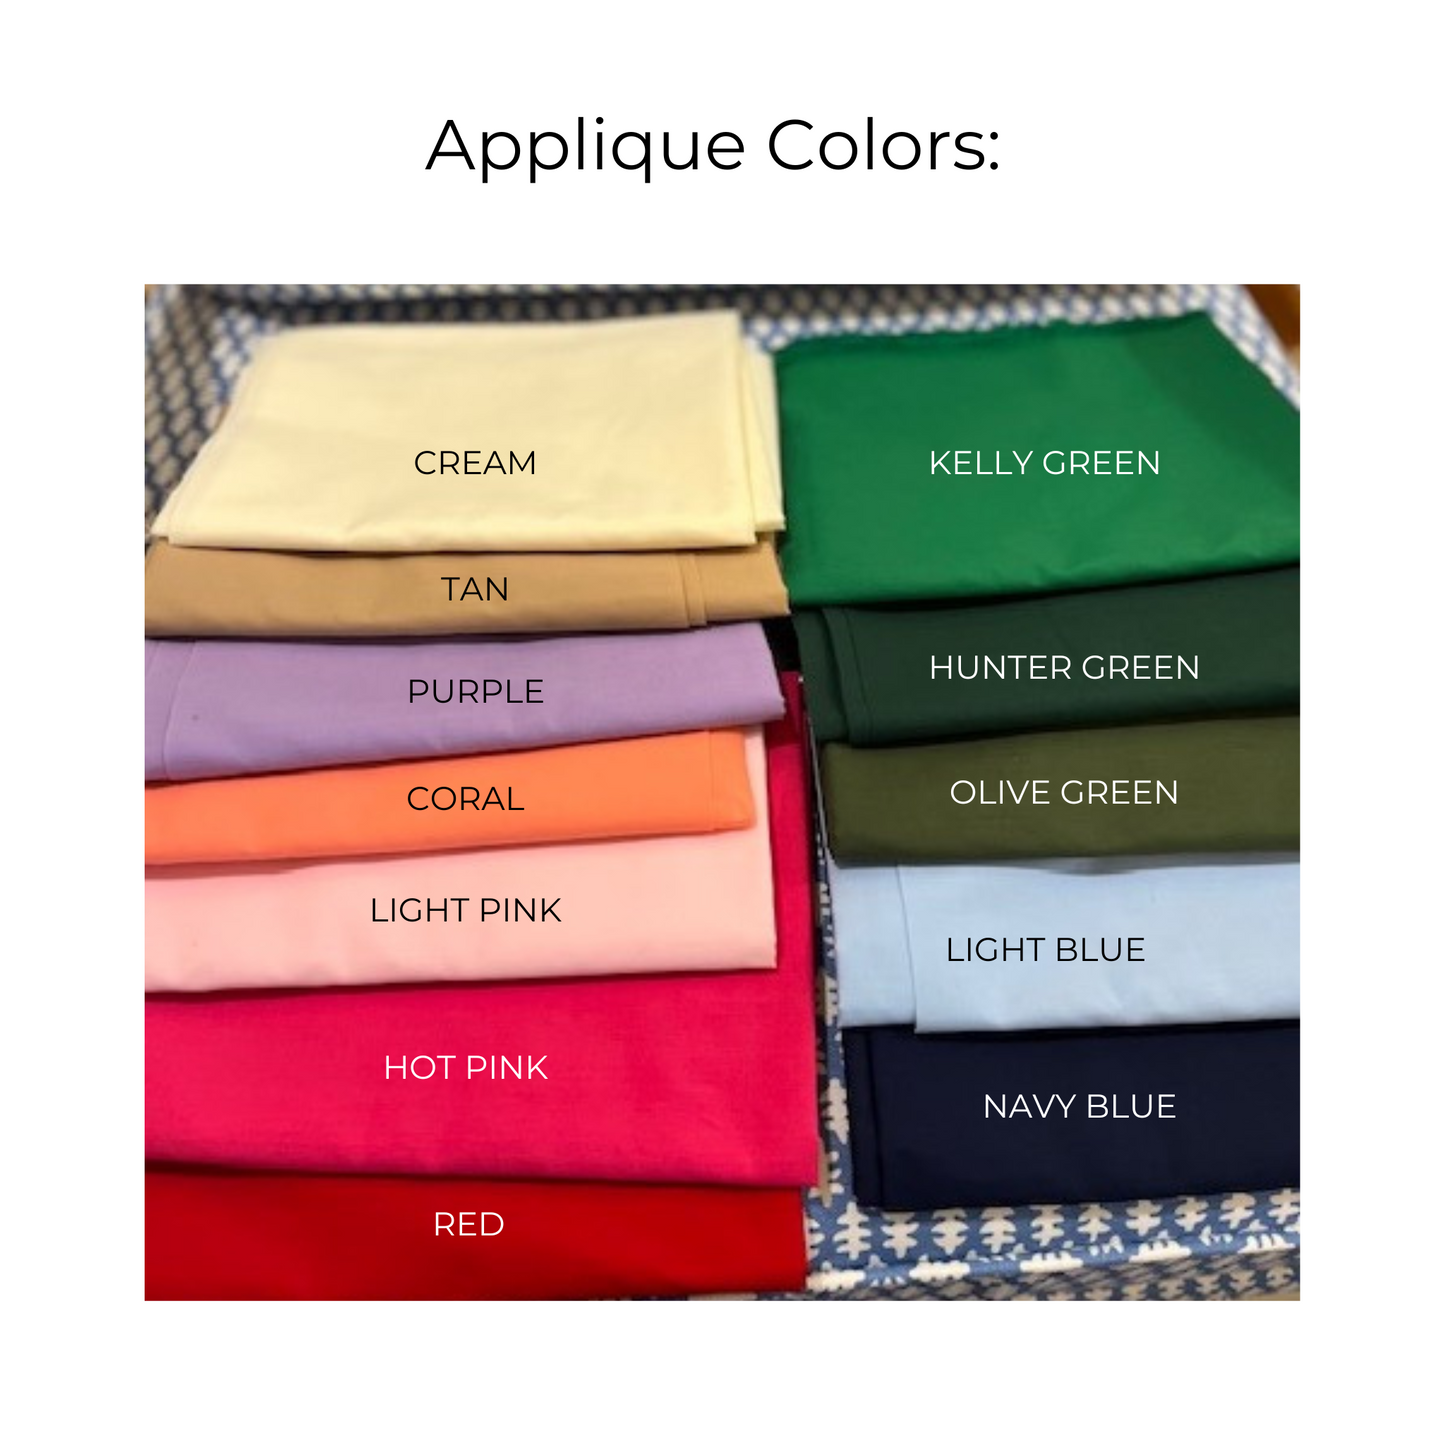 Applique color chart by Winston's Collection